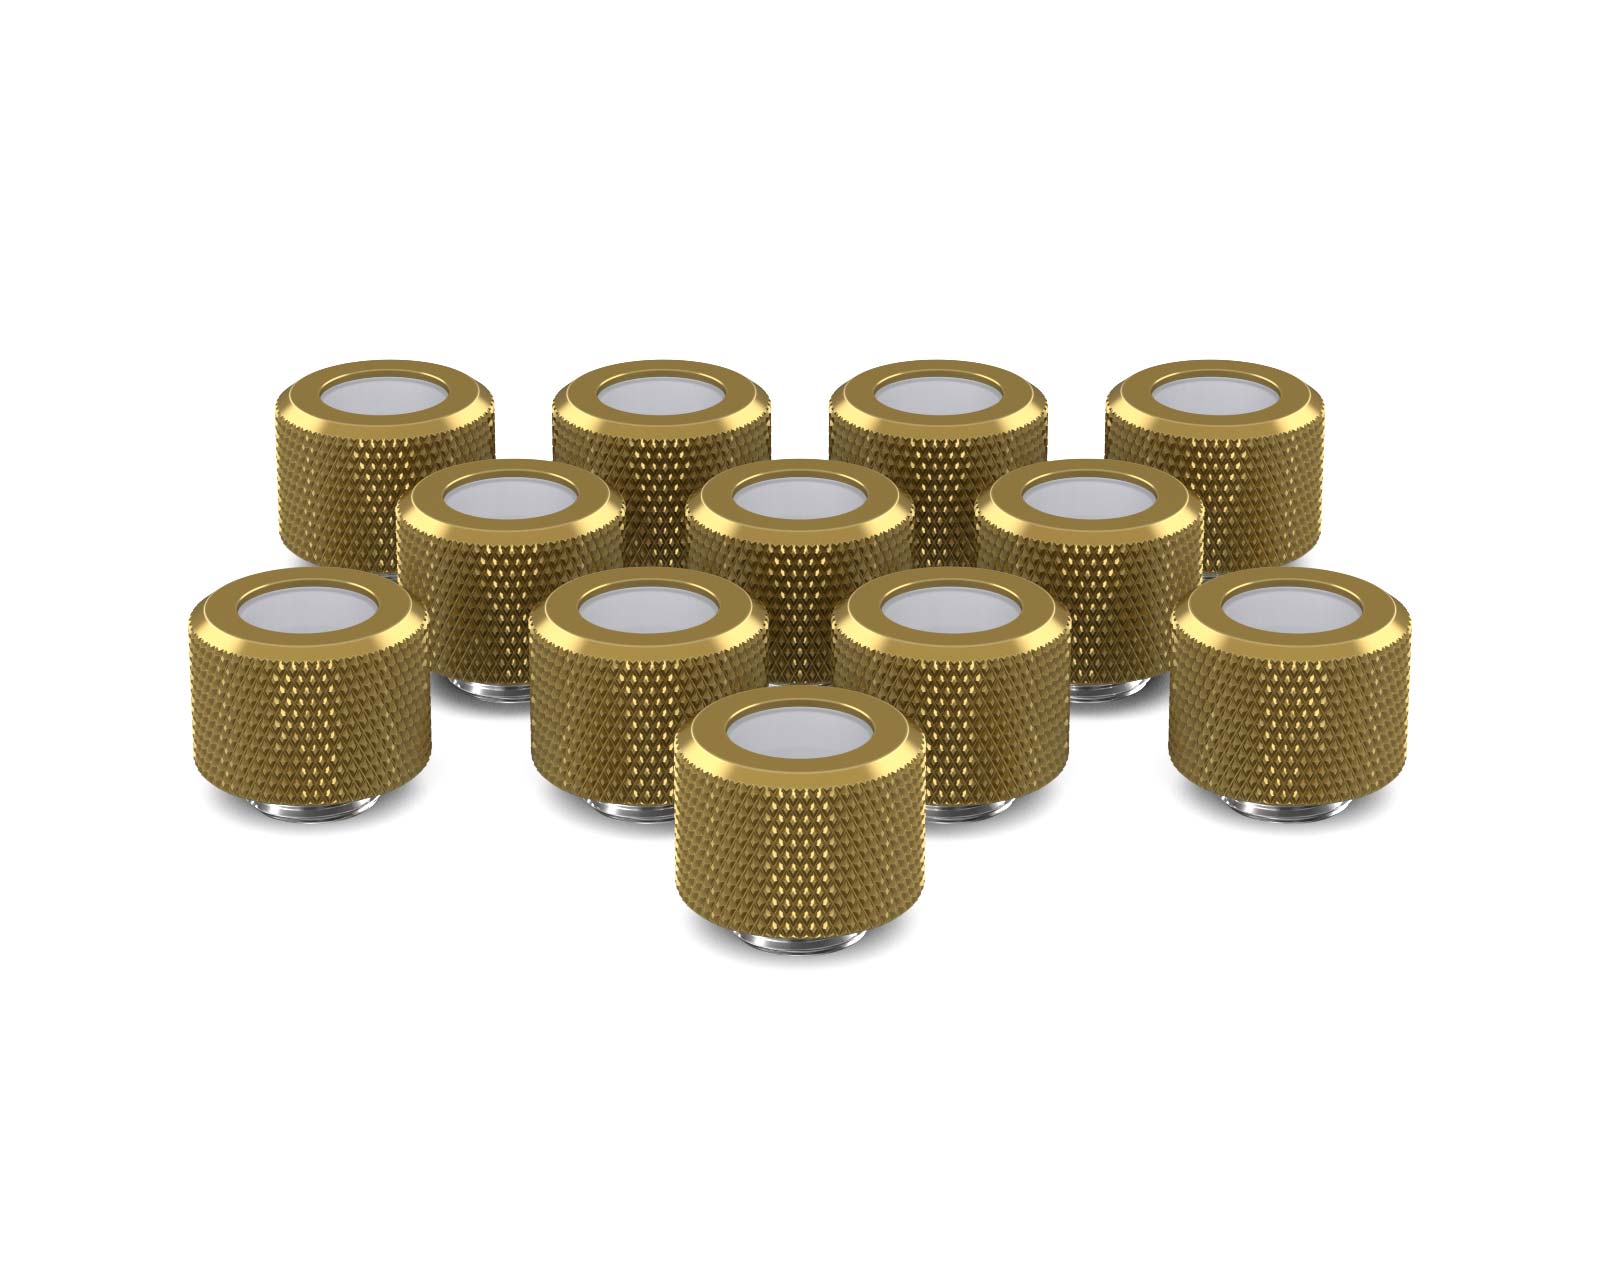 PrimoChill 12mm OD Rigid SX Fitting - 12 Pack - PrimoChill - KEEPING IT COOL Candy Gold